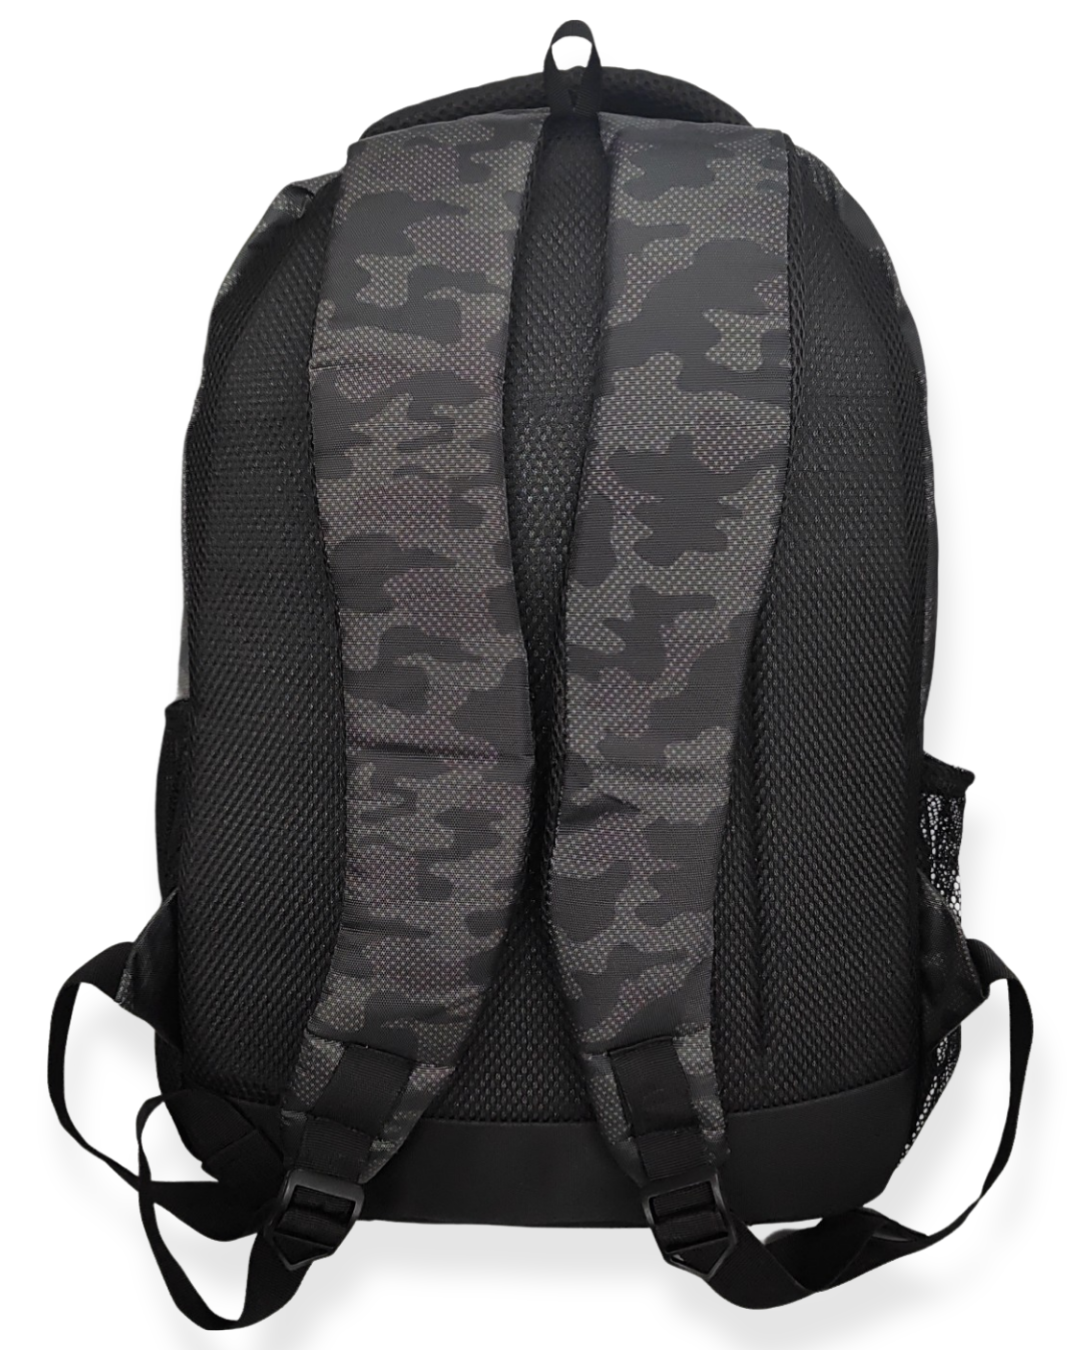 Dhariwal Backpack for college/office/casual 45L Bp-234